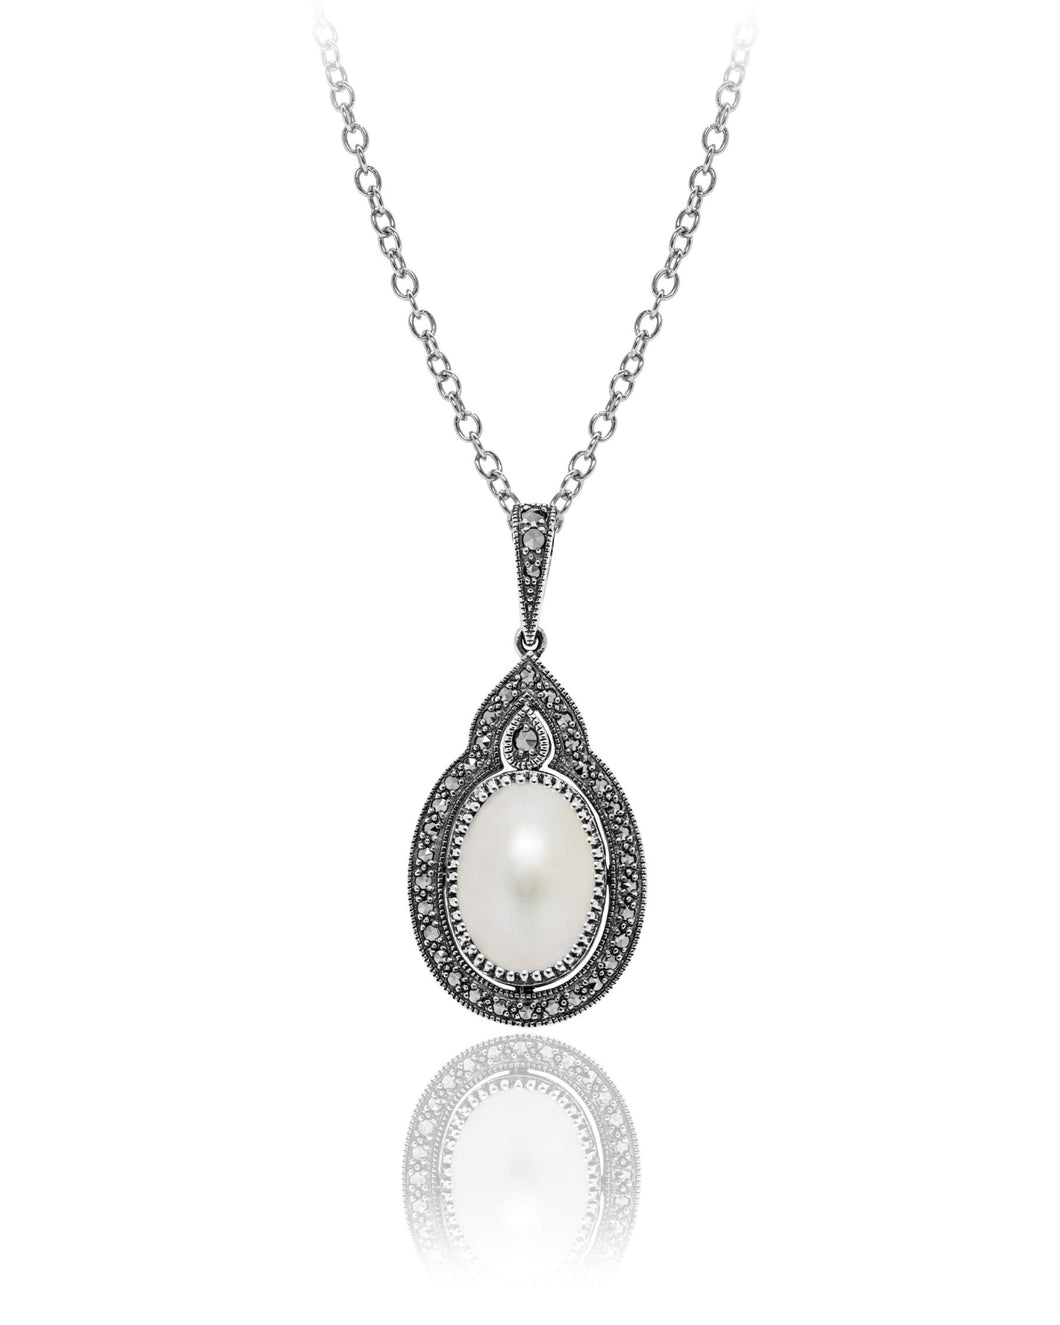 Oval Mabe Pearl Necklace!